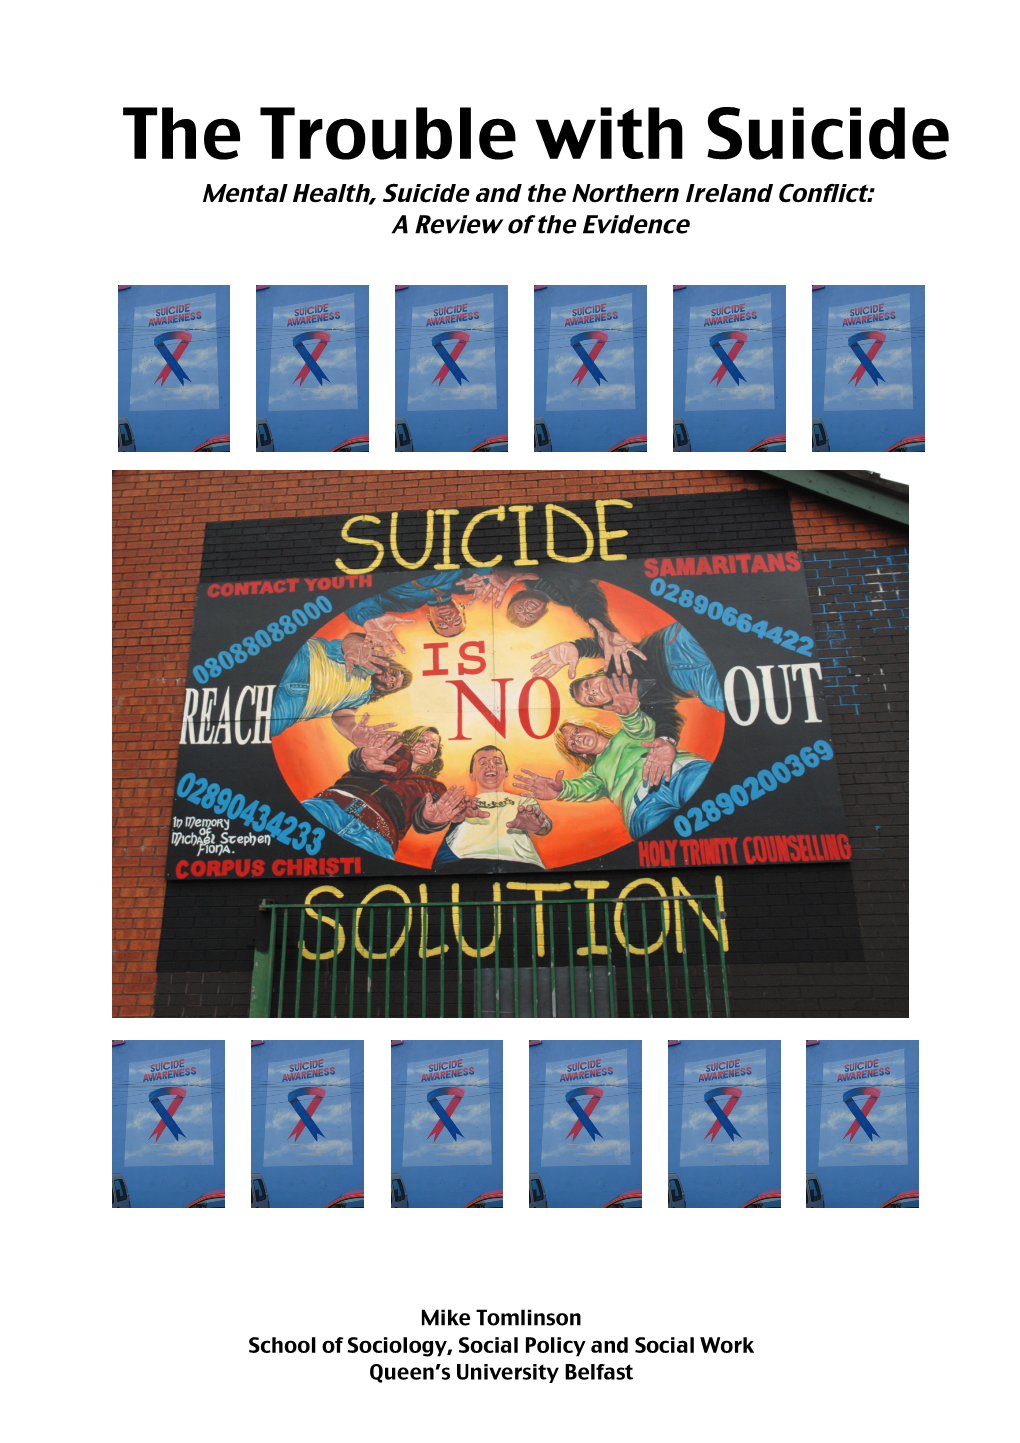 PDF (The Trouble with Suicide)